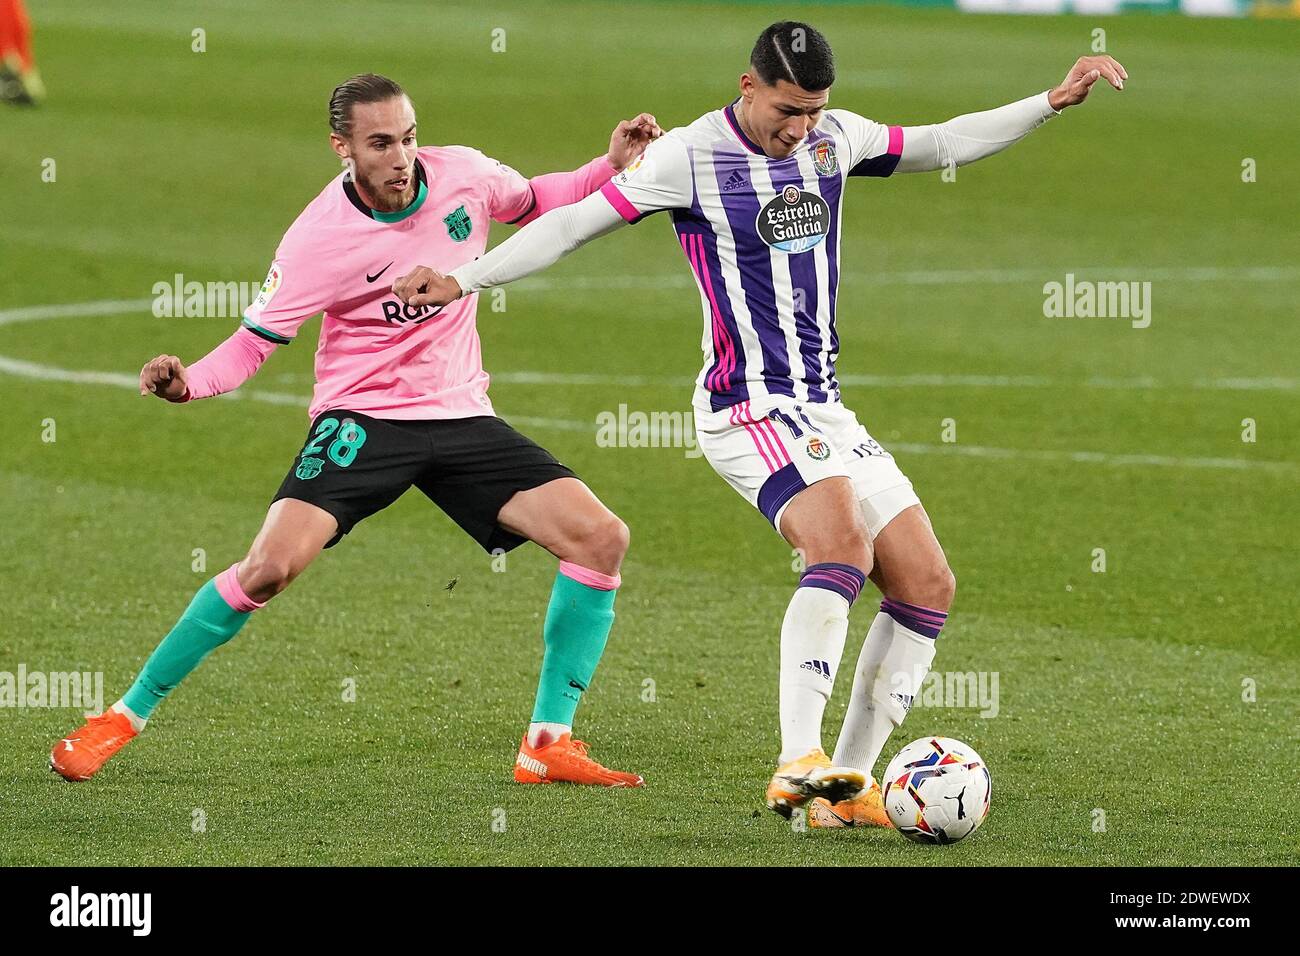 Valladolid, Spain. 22nd Dec, 2020. Real Valladolid's Marcos Andre (r) and FC Barcelona's Oscar Mingueza during La Liga match Real Valladolid v FC Barcelona in Valladolid, Spain on December 22, 2020. Photo by Acero/AlterPhotos/ABACAPRESS.COM Credit: ABACAPRESS/Alamy Live News Stock Photo